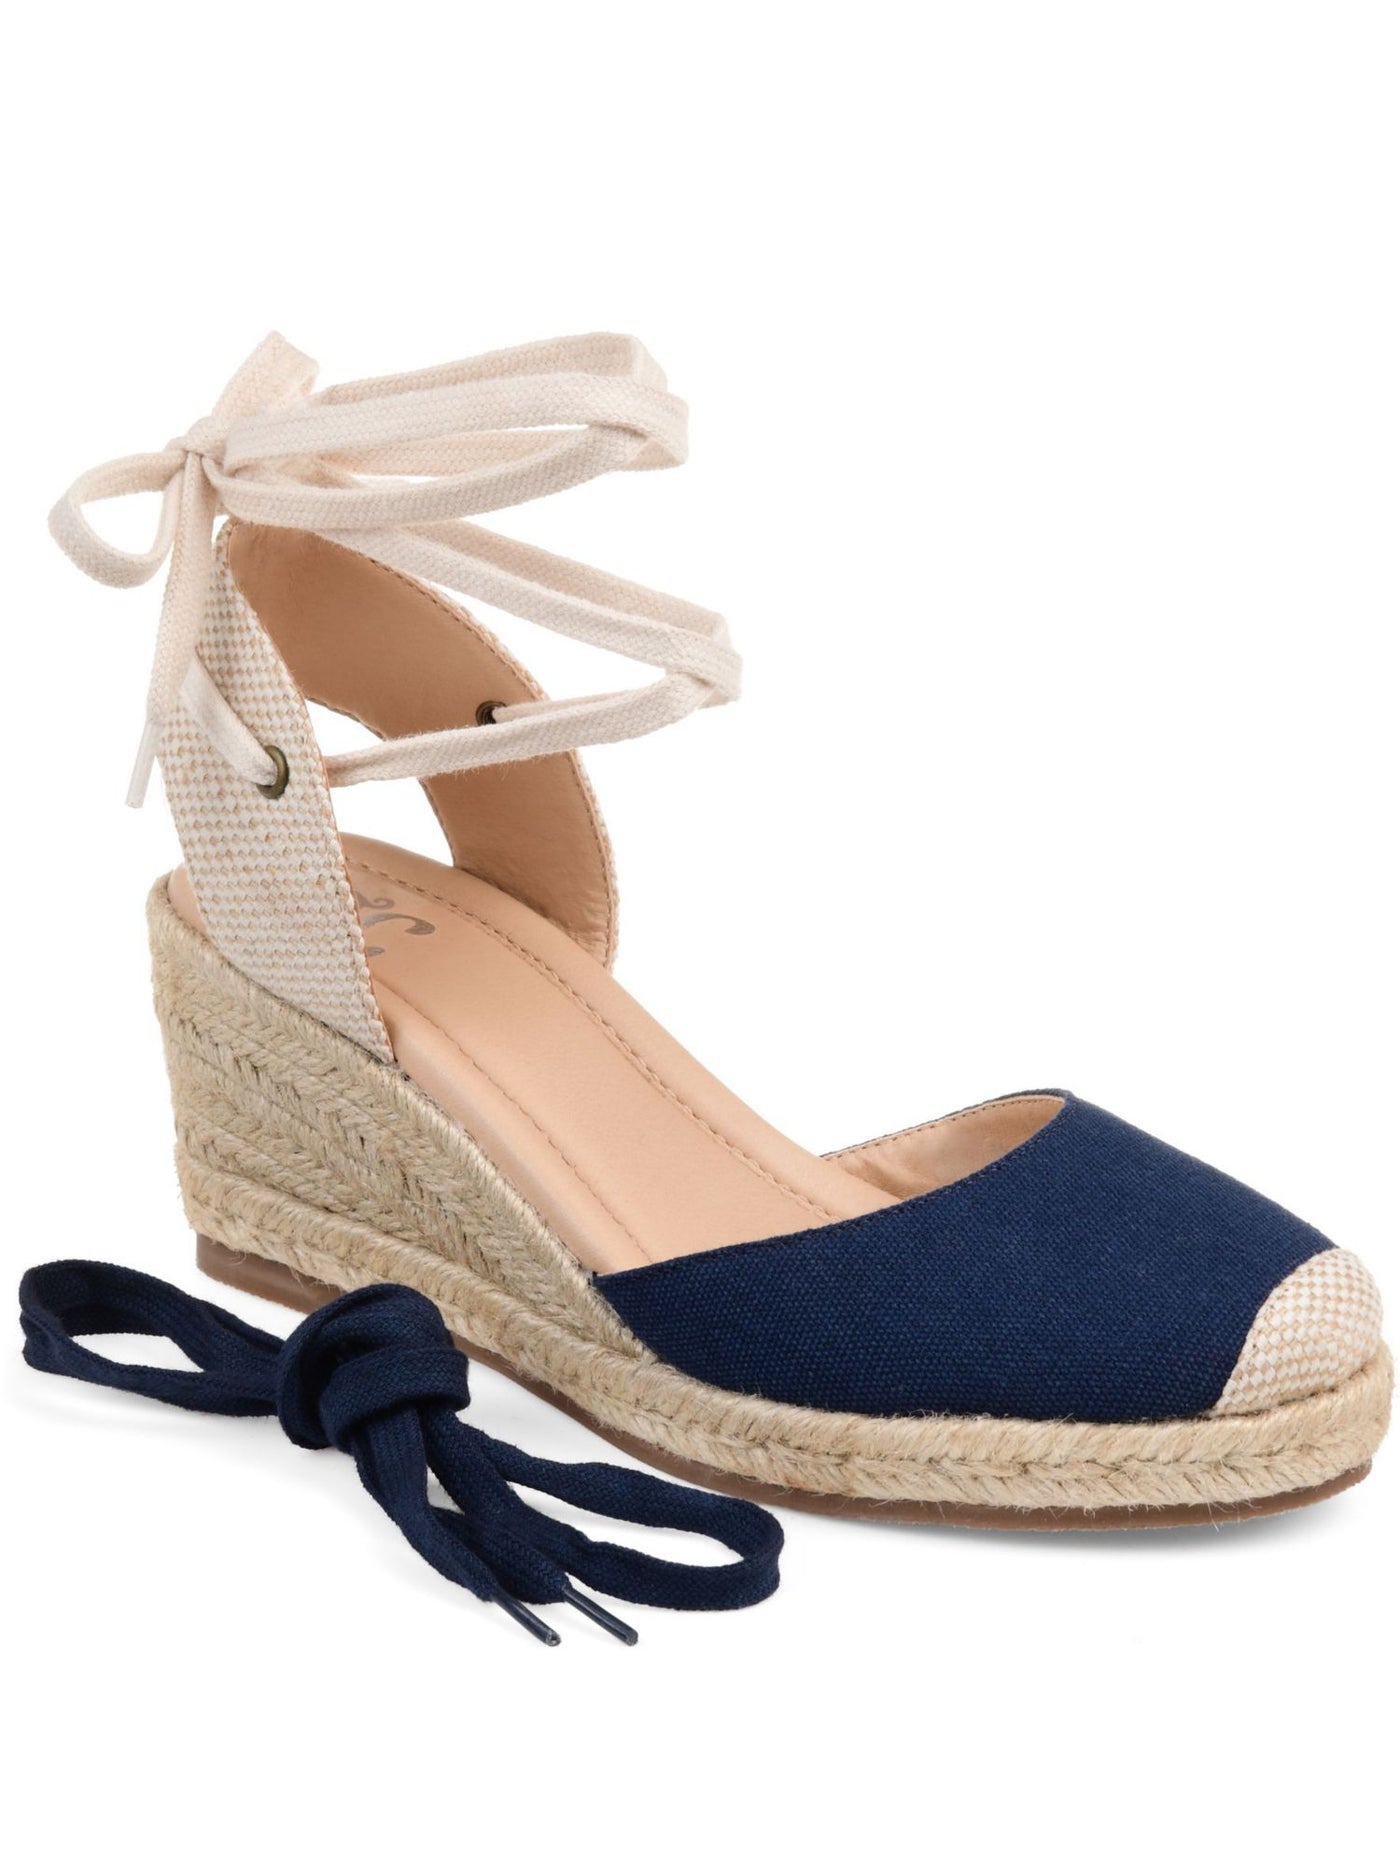 JOURNEE COLLECTION Womens Navy 1/2" Platform Open Back Shoe Padded Monte Round Toe Wedge Lace-Up Espadrille Shoes 11